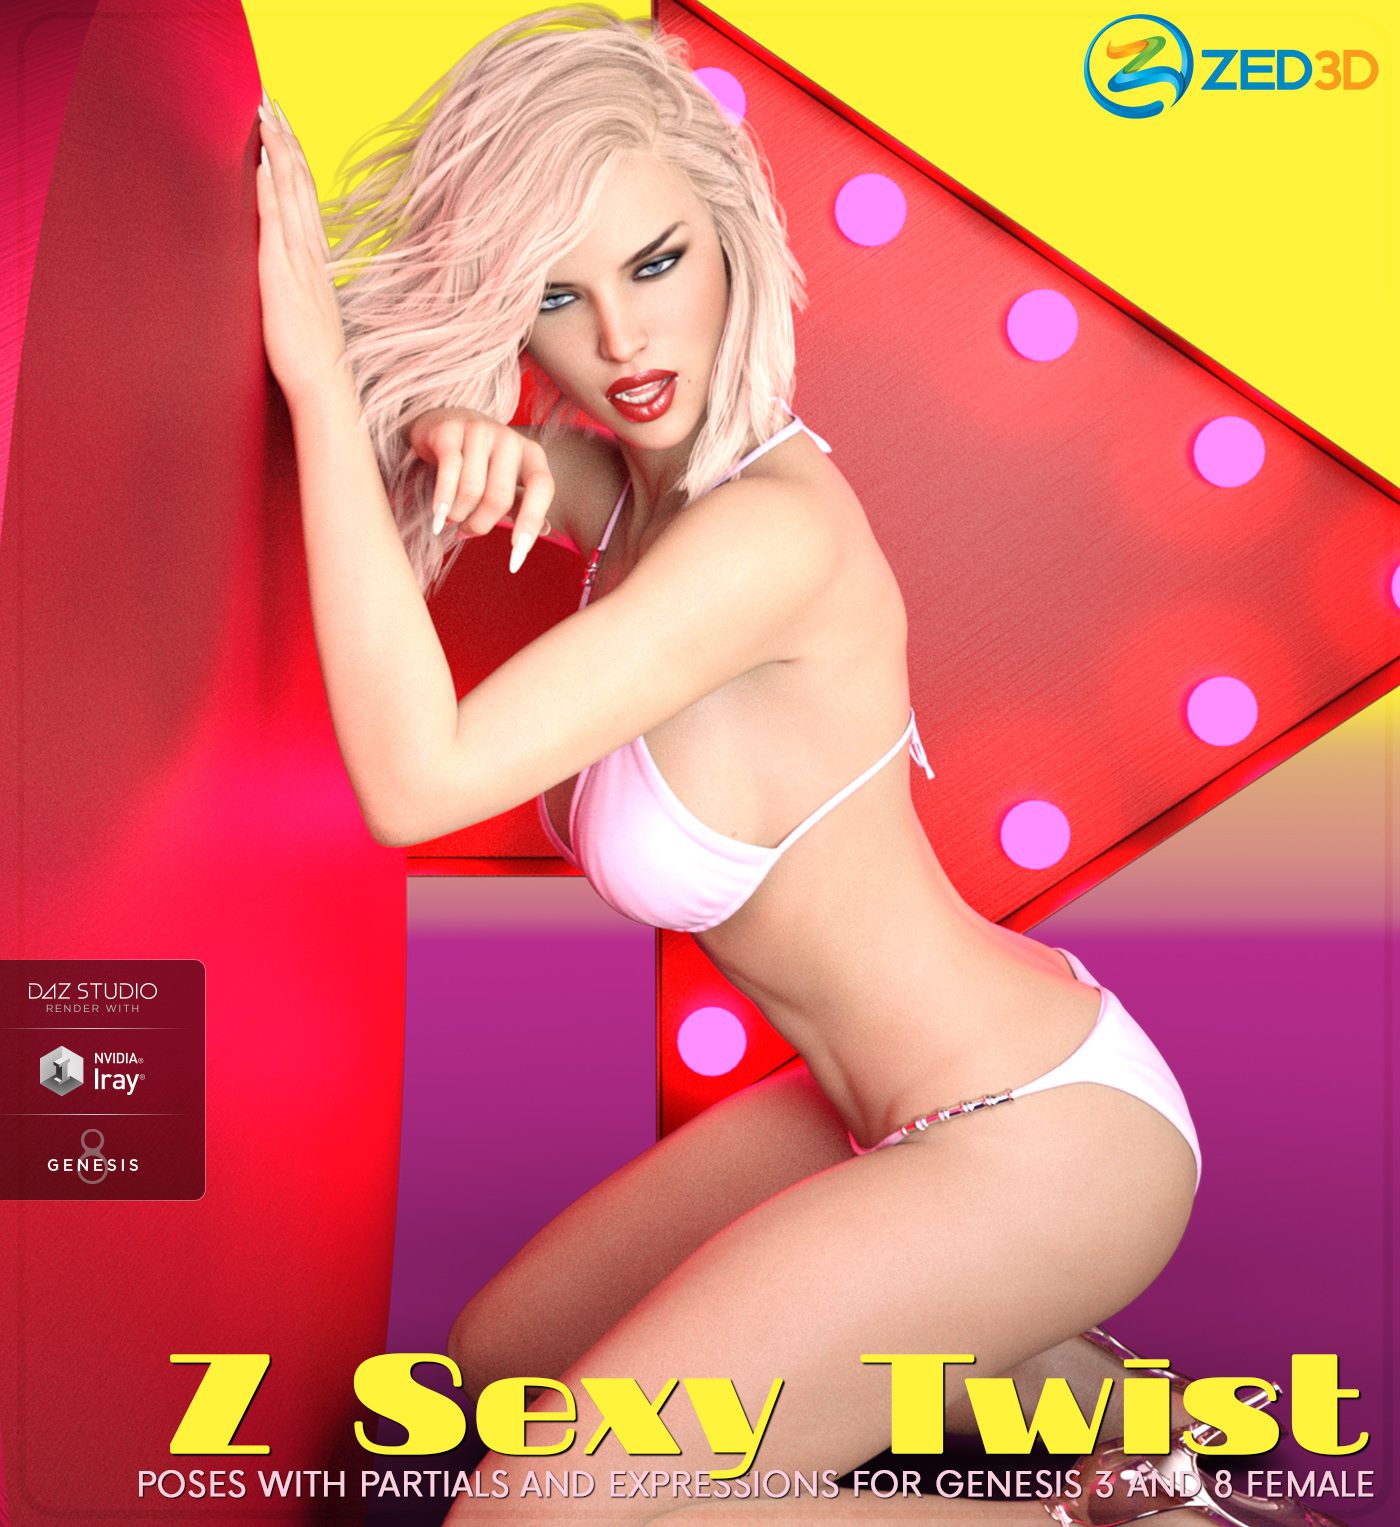 Z Sexy Twist – Poses with Partials for Genesis 3 and 8 Females_DAZ3D下载站